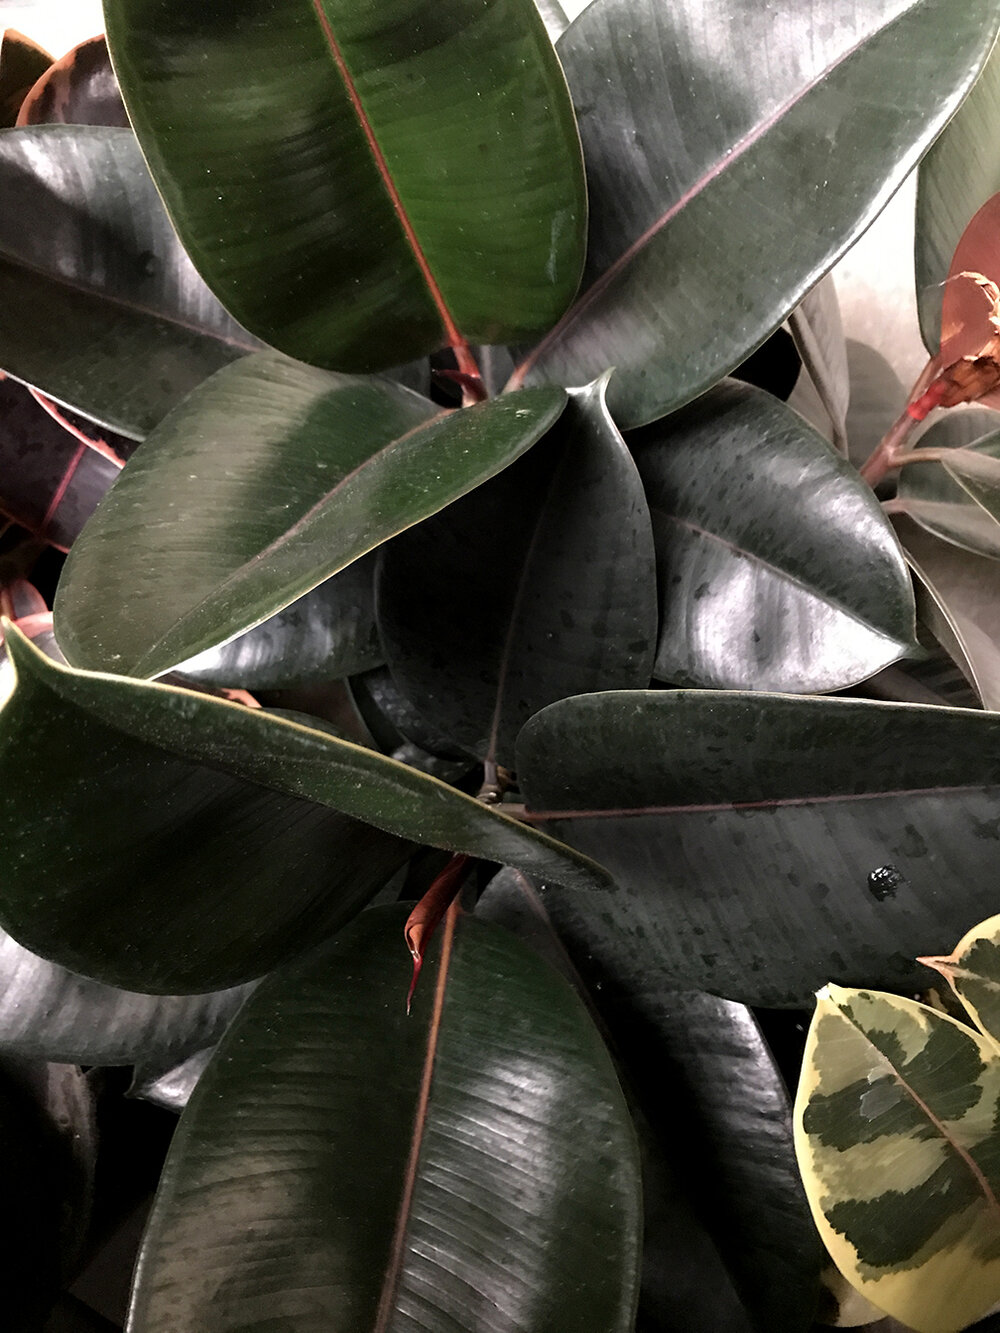 2' Rubber Tree Plant LG | Bloomscape | Burgundy Rubber Tree | Low Maintenance Plants Indoors | Plant Delivery | Ficus Elastica Burgundy